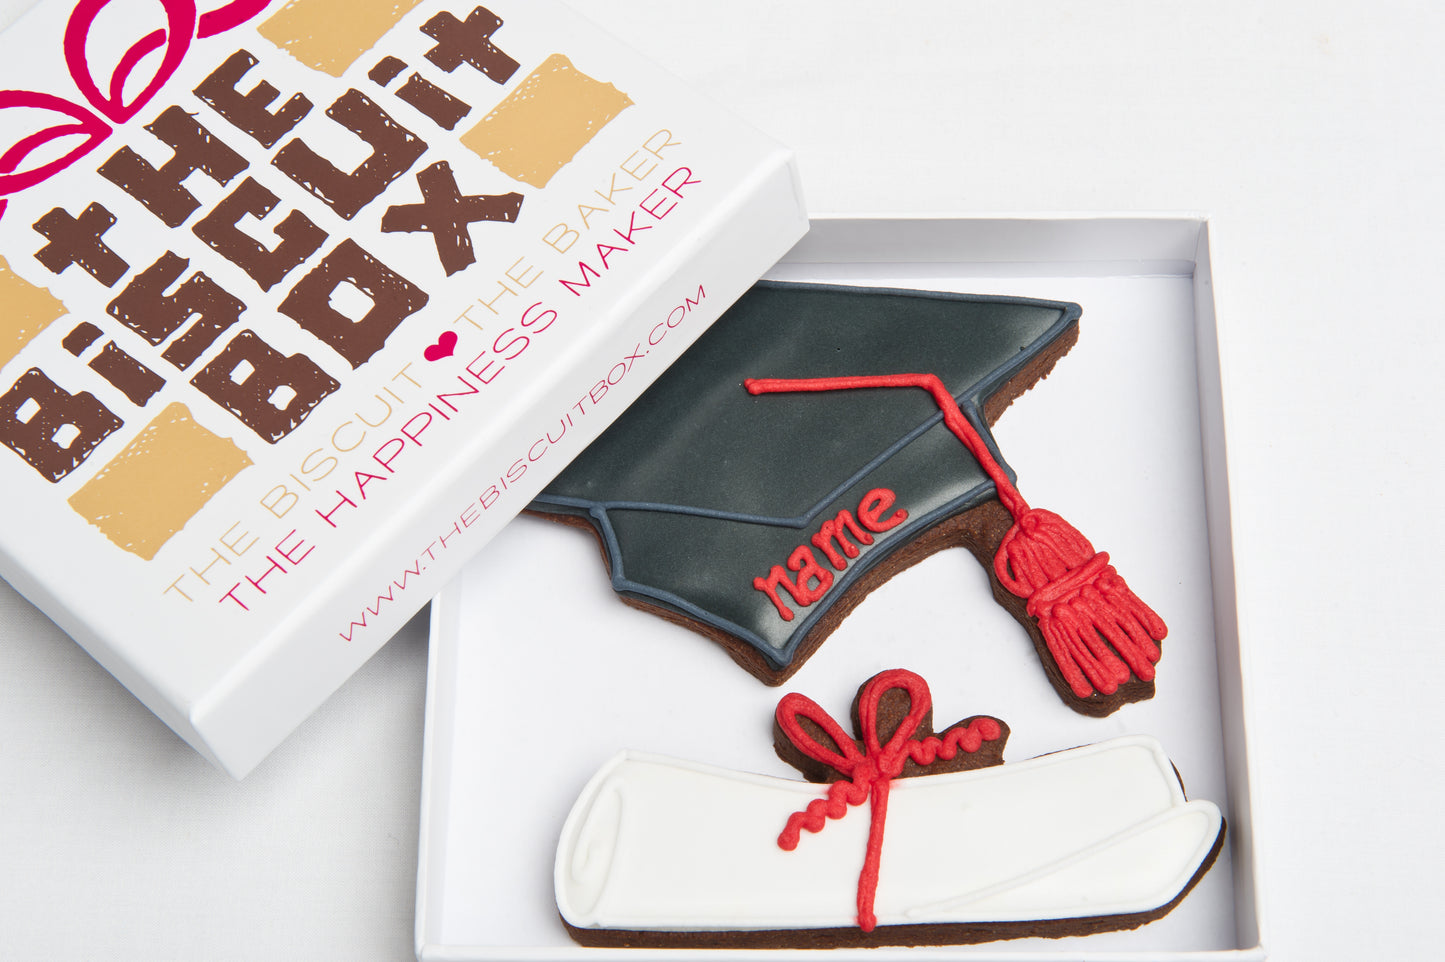 Graduation biscuit gift box. Scroll biscuit and graduate hat with personalised name in red icing.